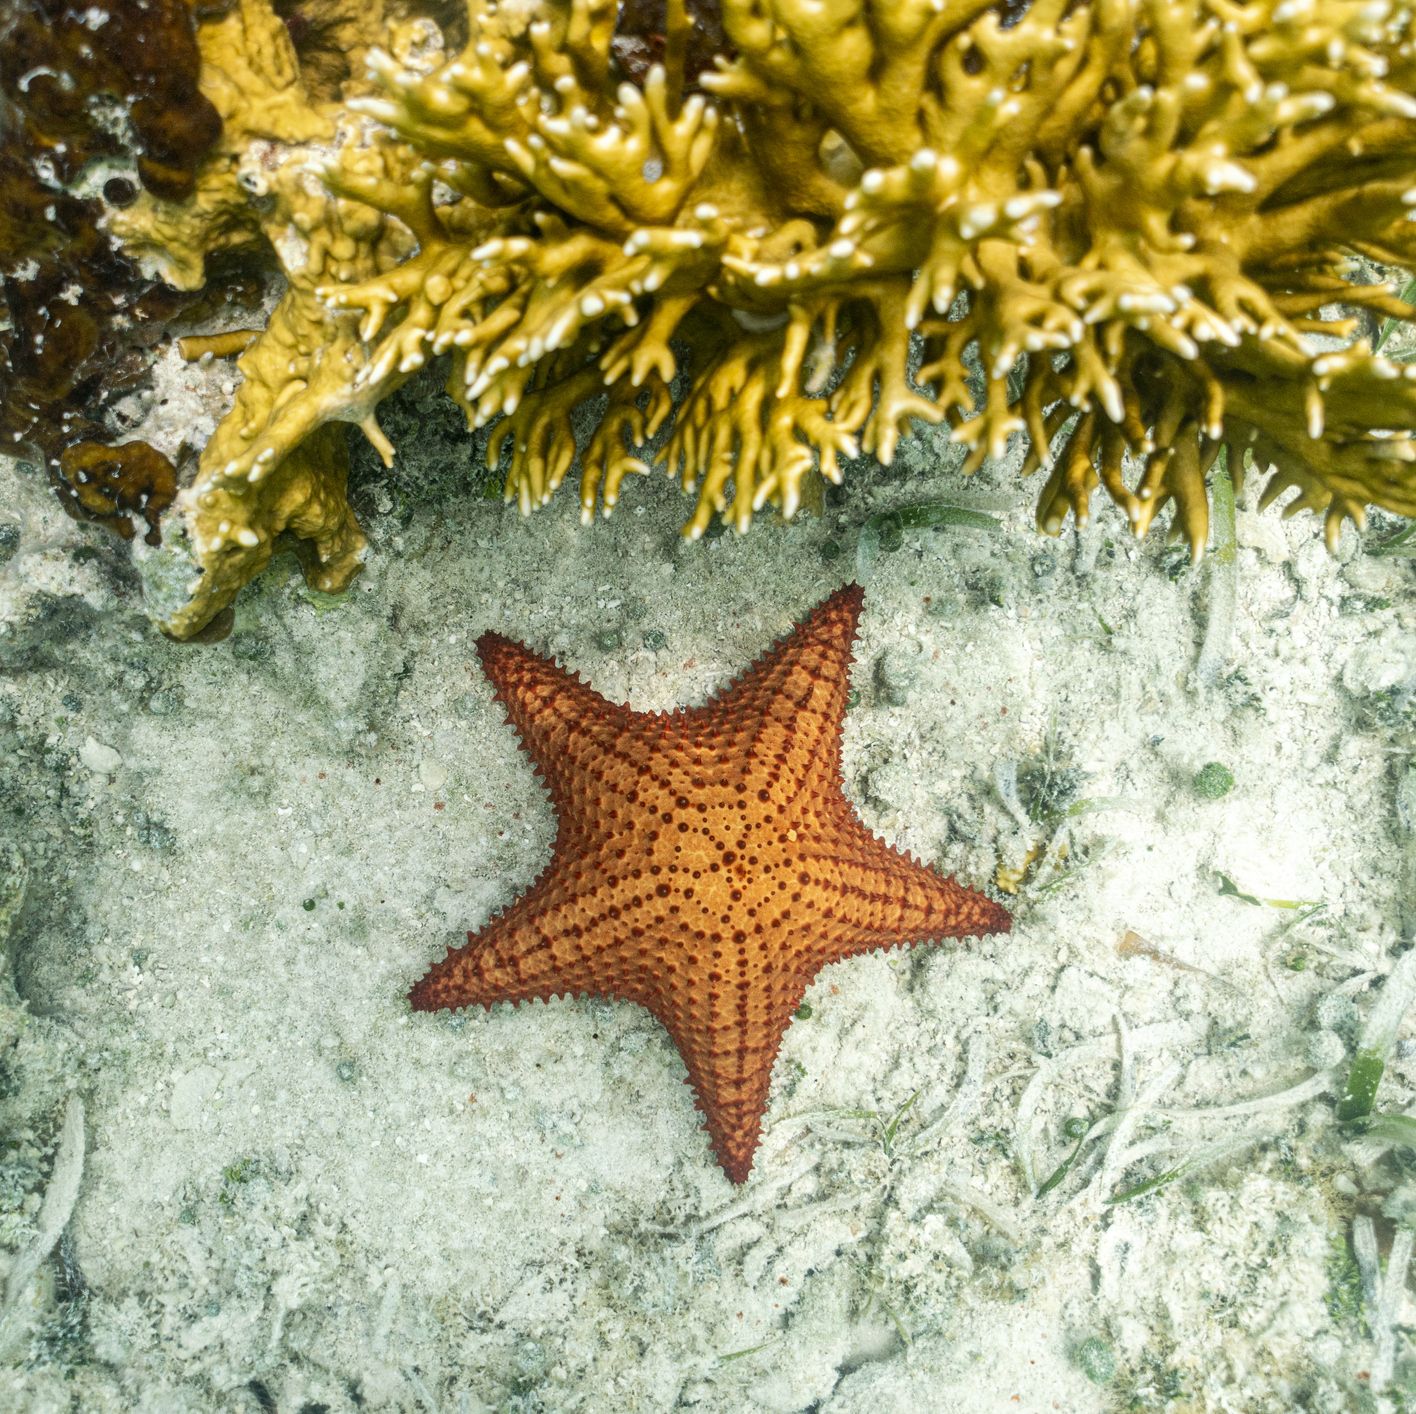 A Study Says Starfish Are Basically Walking Heads, and Literally Nothing Else